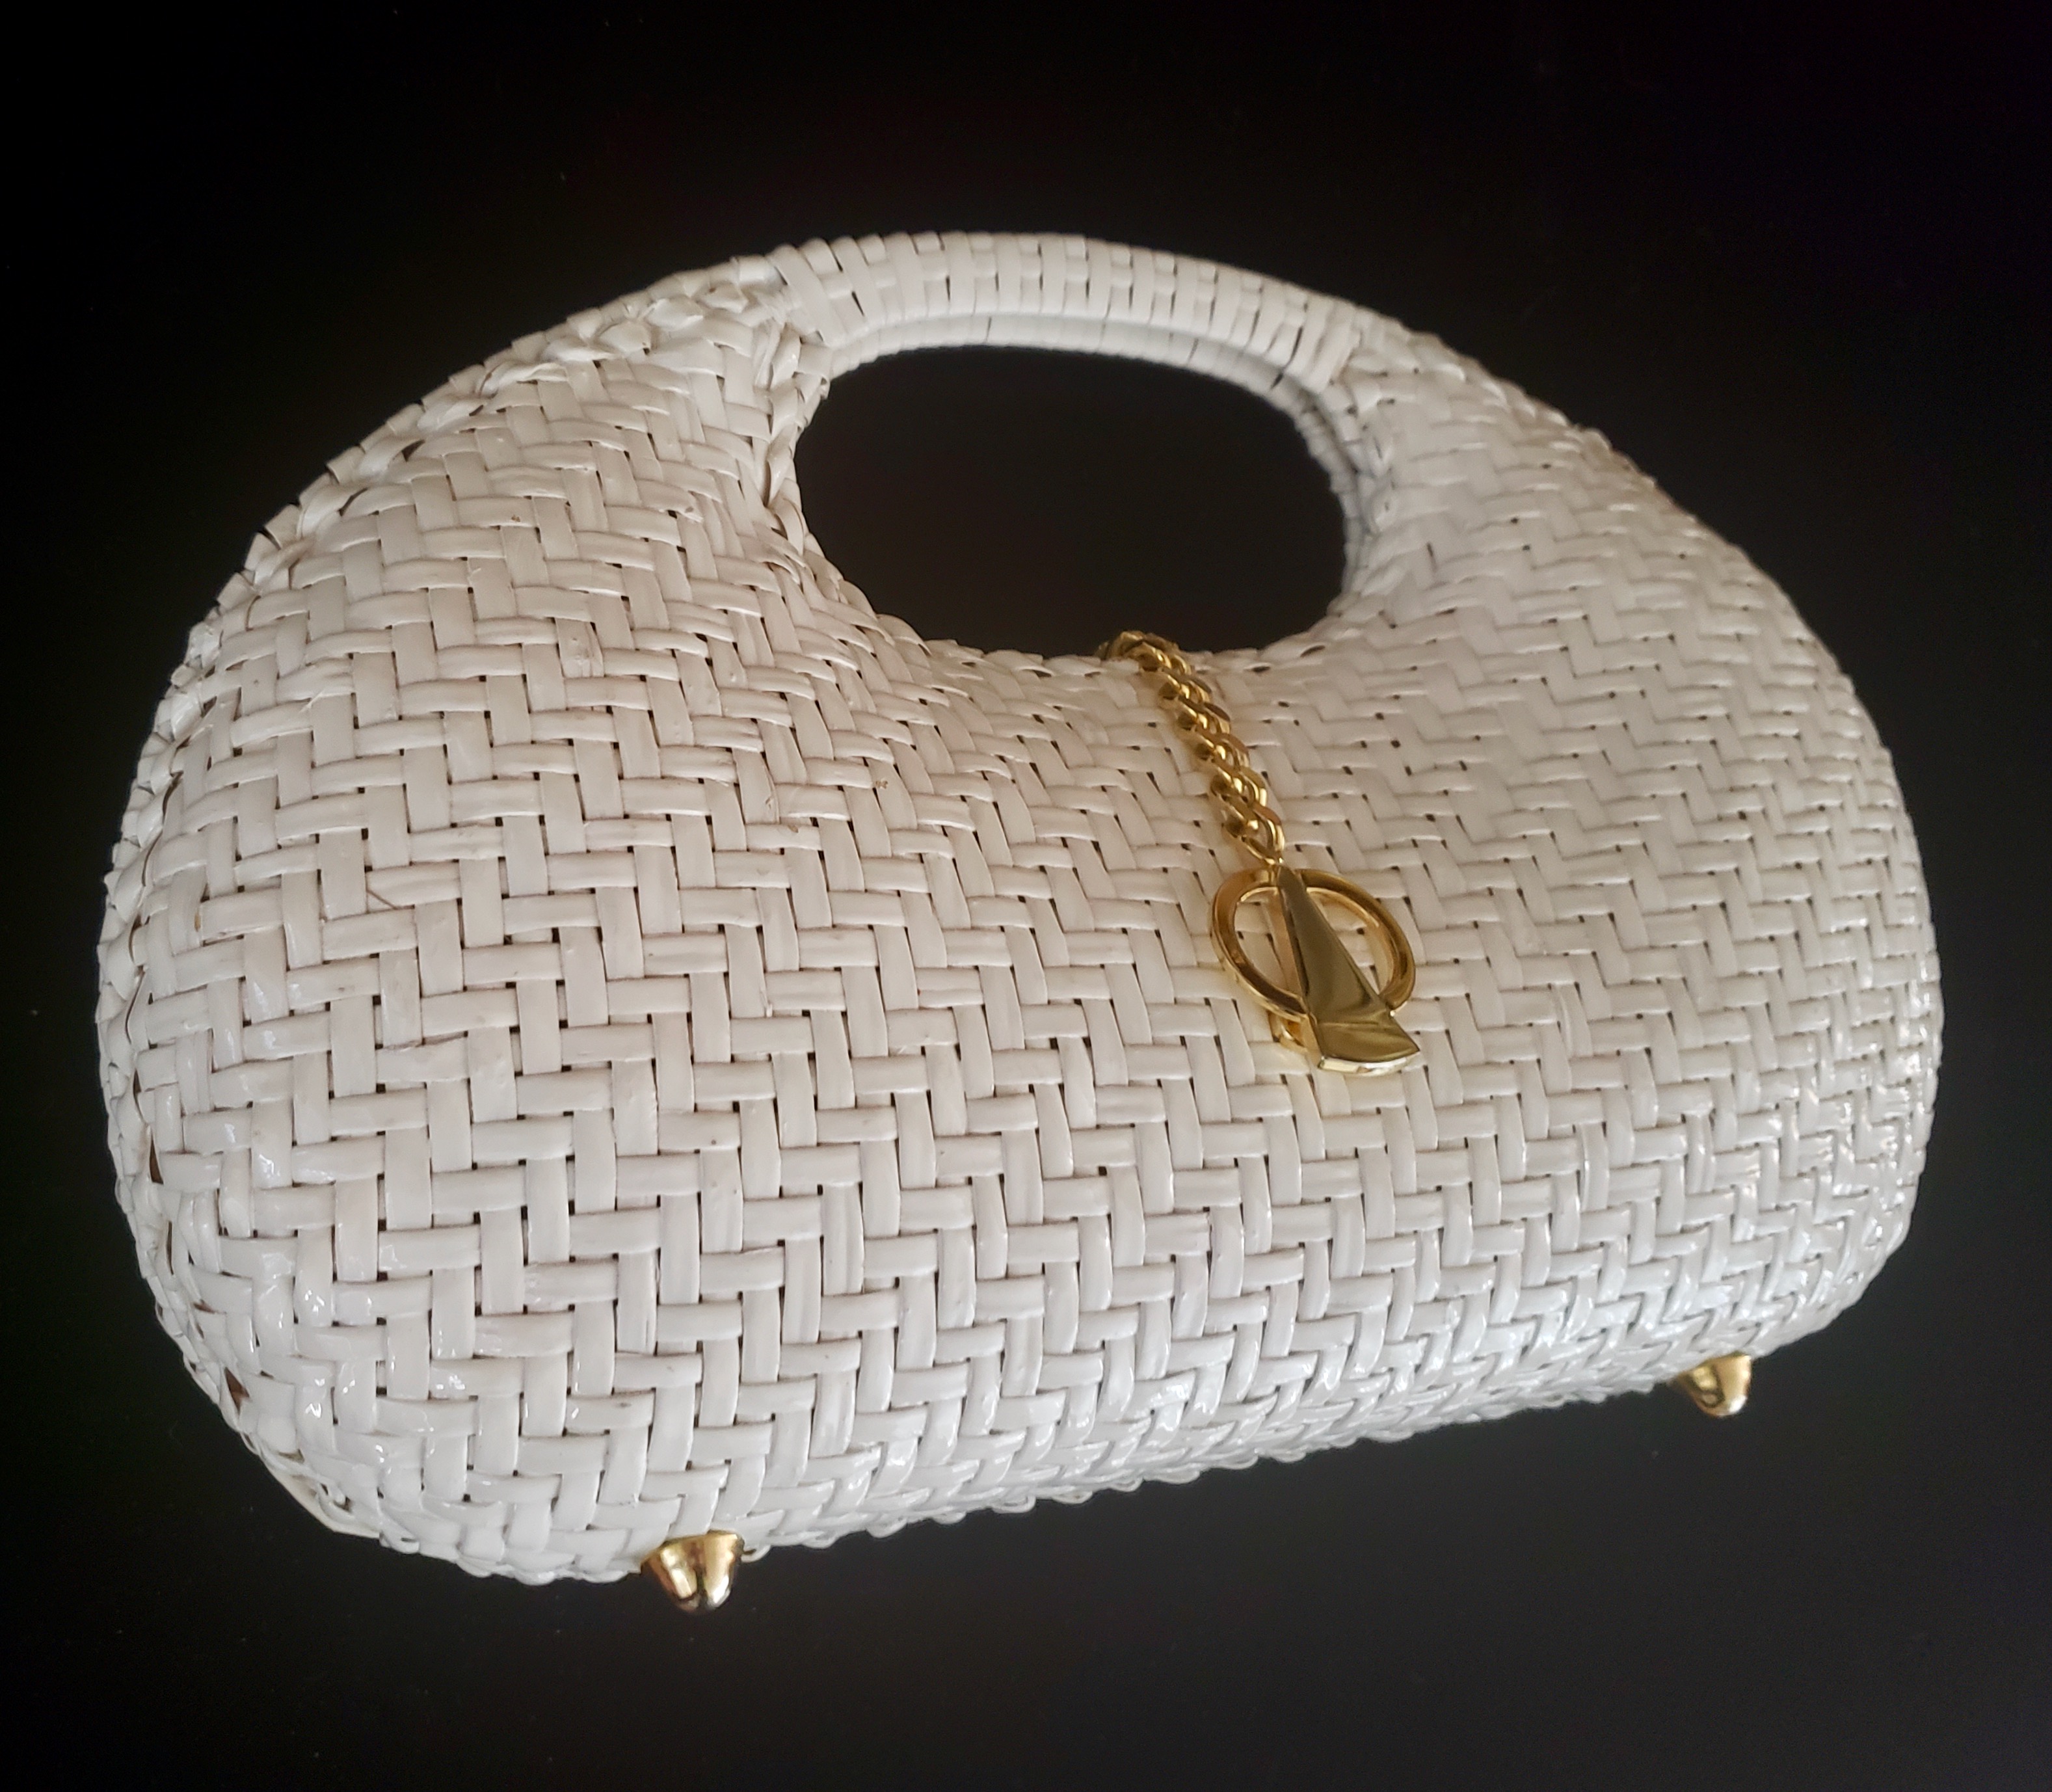 Vintage MM Morris Moskowitz Woven Straw Purse with Brass Metal